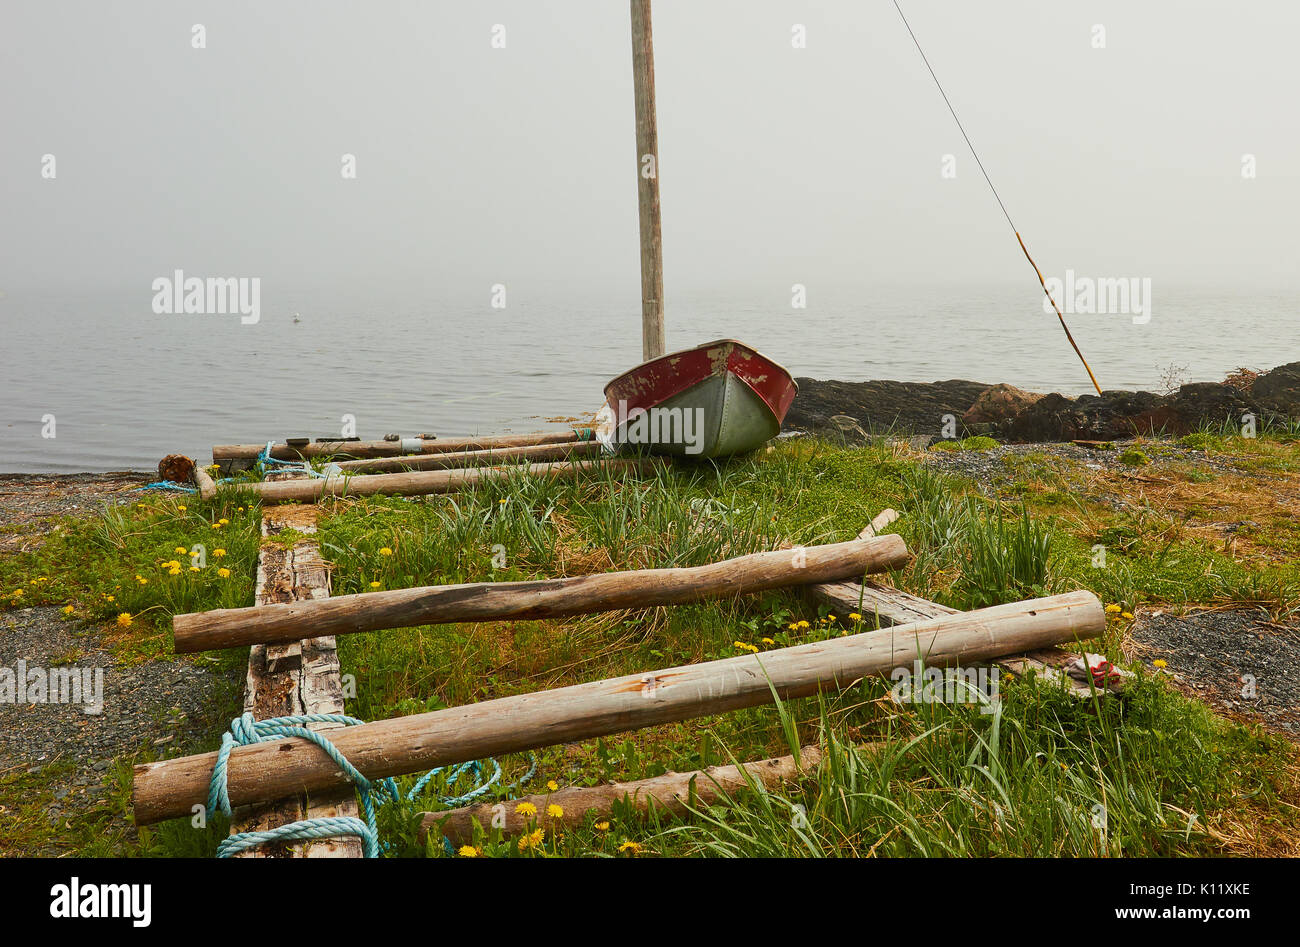 Small boat at misty water's edge and wooden boat ramp, Great Northern Peninsula, Newfoundland, Canada Stock Photo